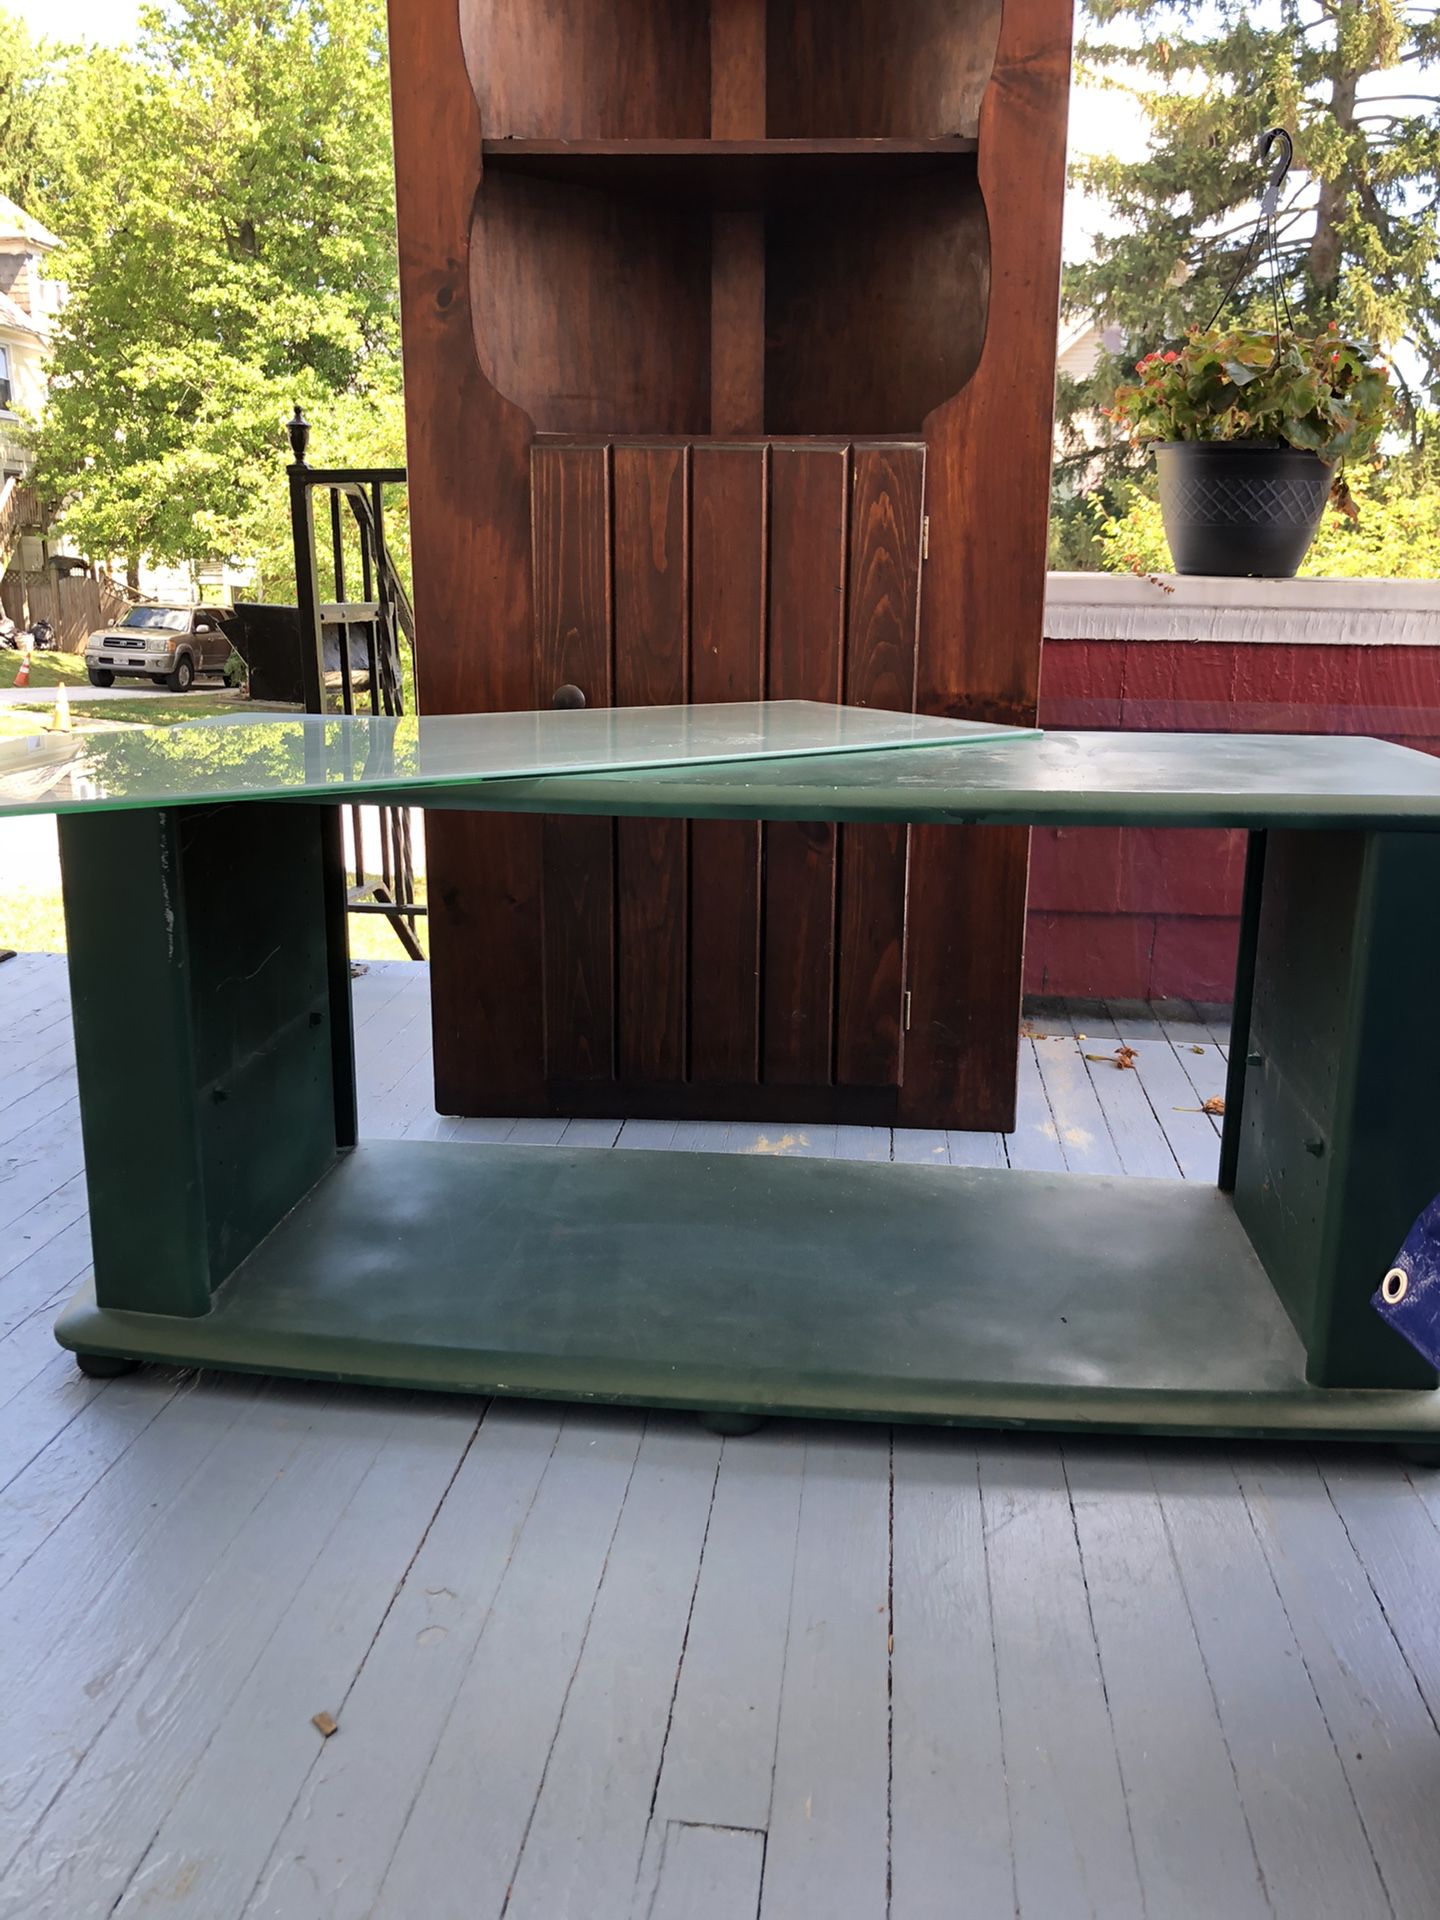 Hunter green TV stand/coffee table with glass shelves